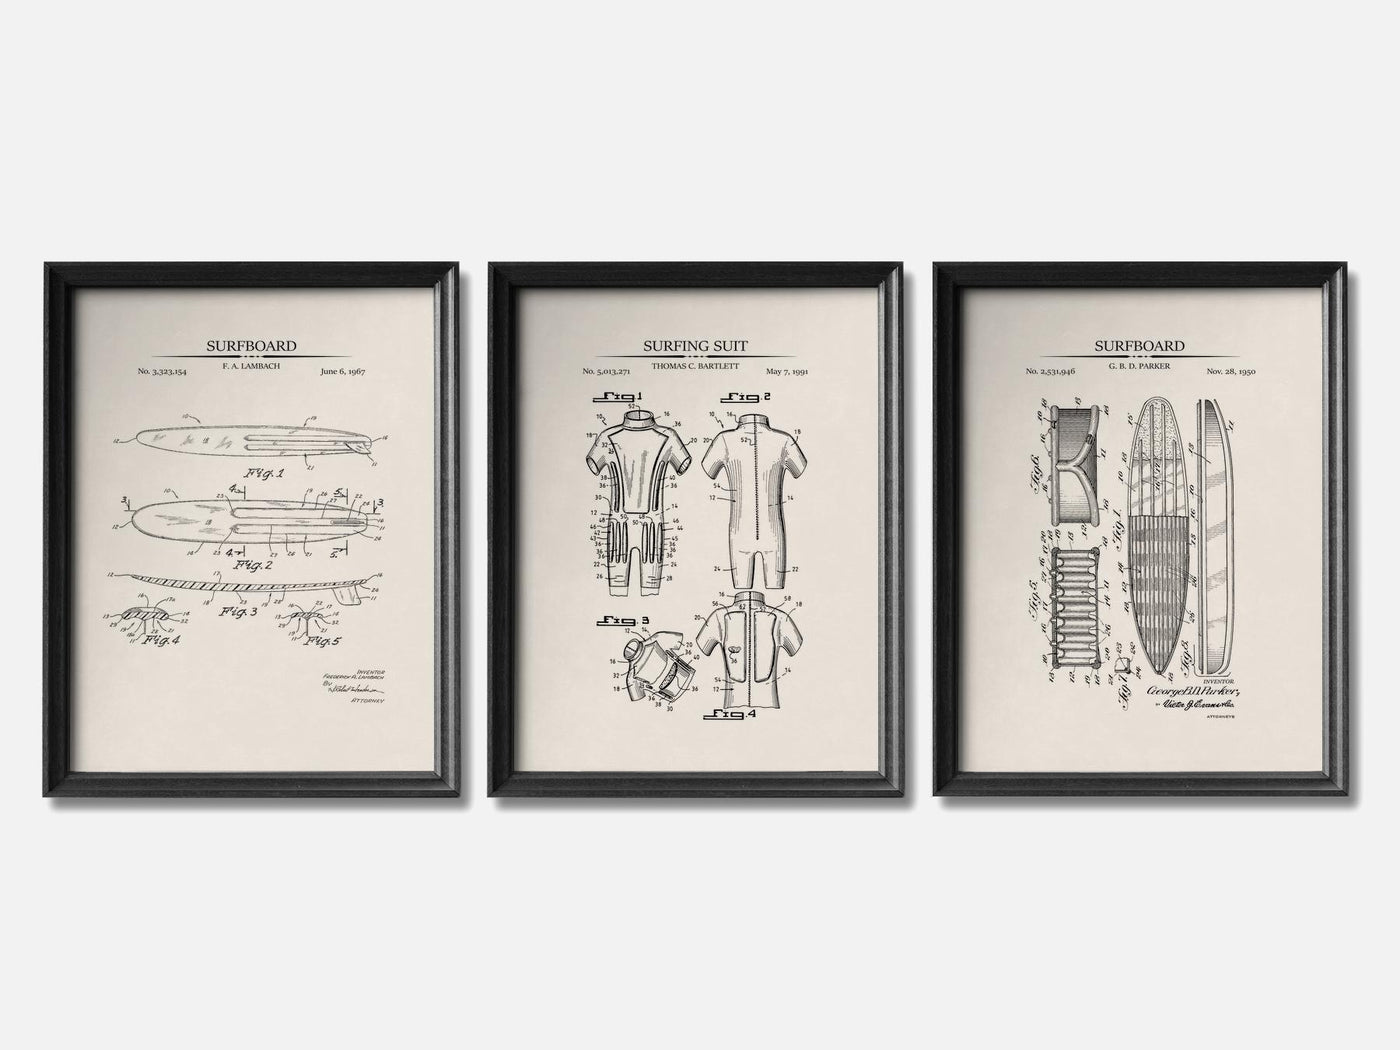 Surfing Patent Print Set of 3 mockup - A_t10068-V1-PC_F+B-SS_3-PS_11x14-C_ivo variant